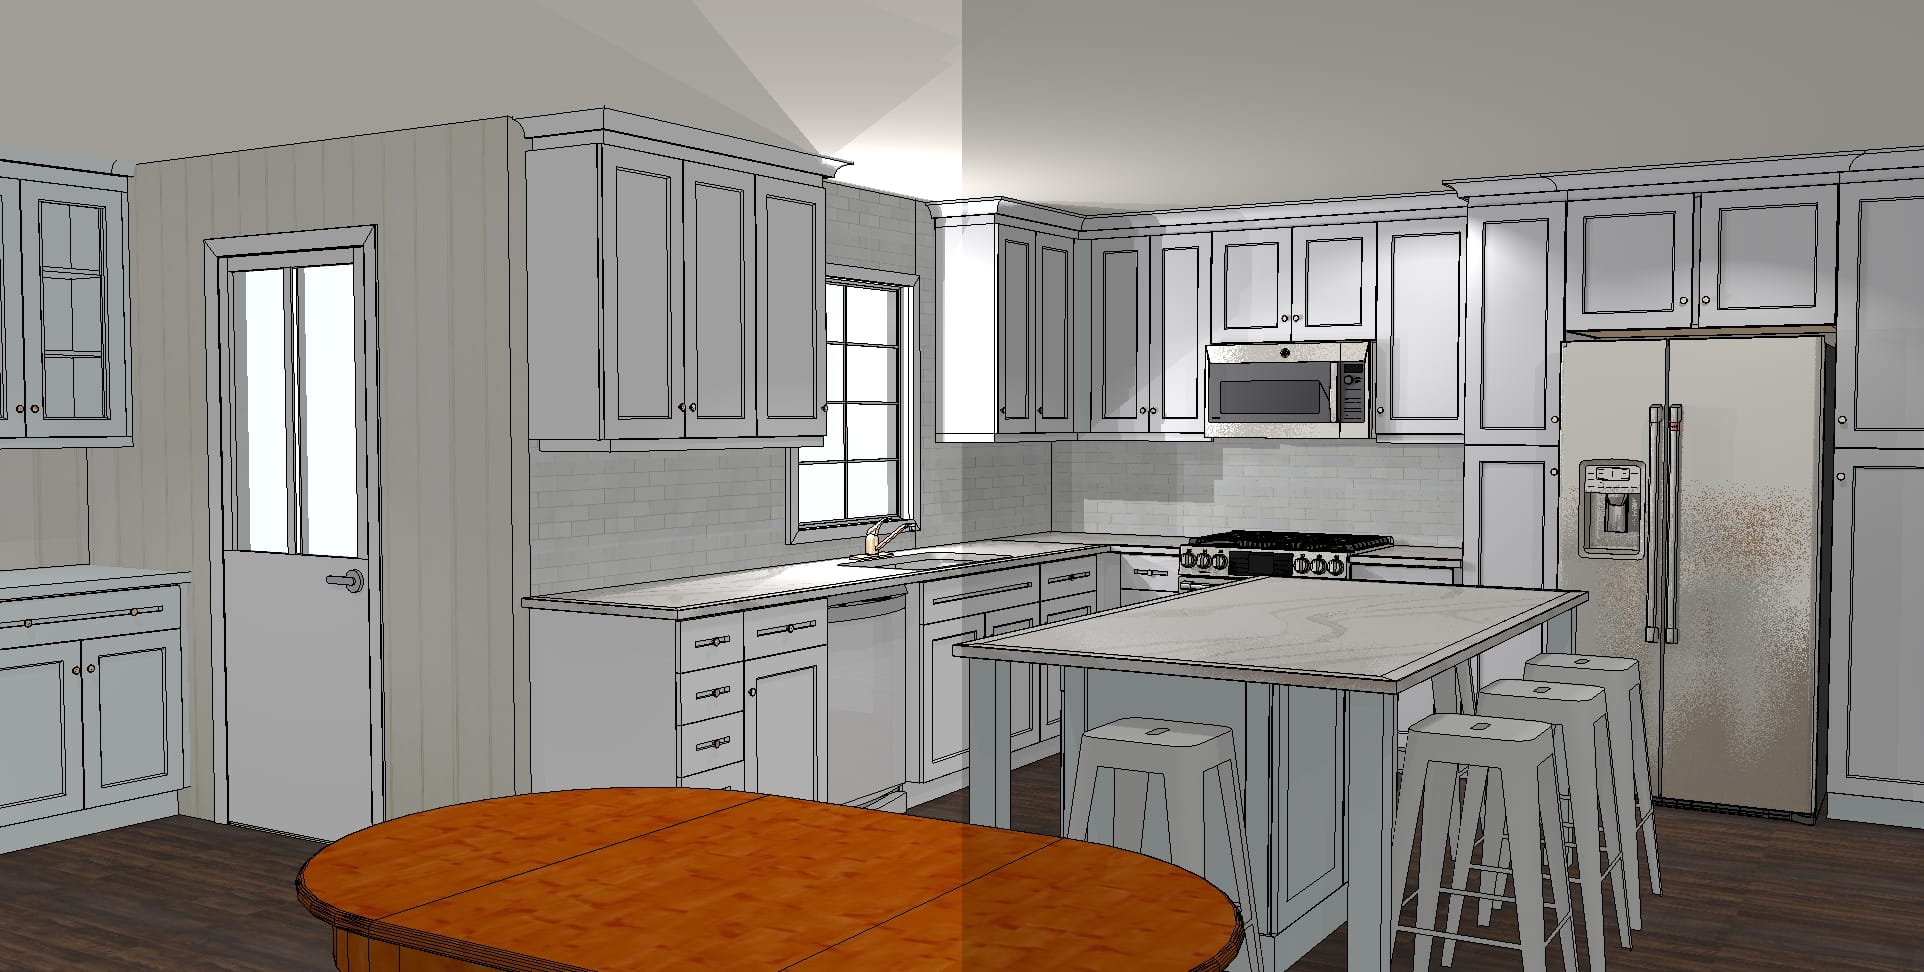 3D Concept for a kitchen remodel